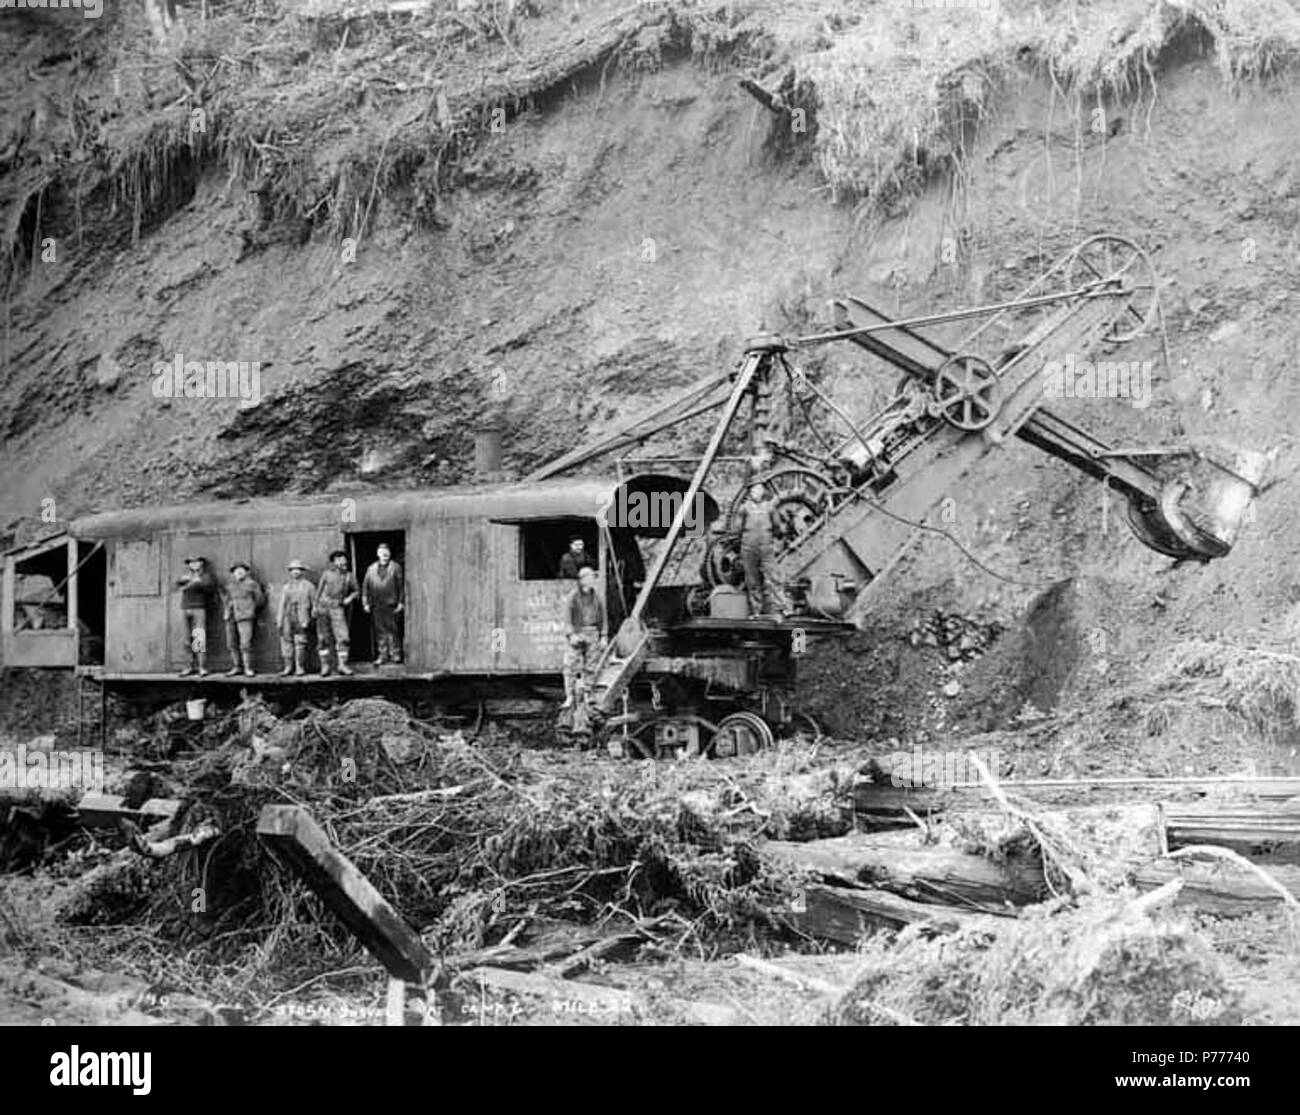 And the steam shovel фото 68